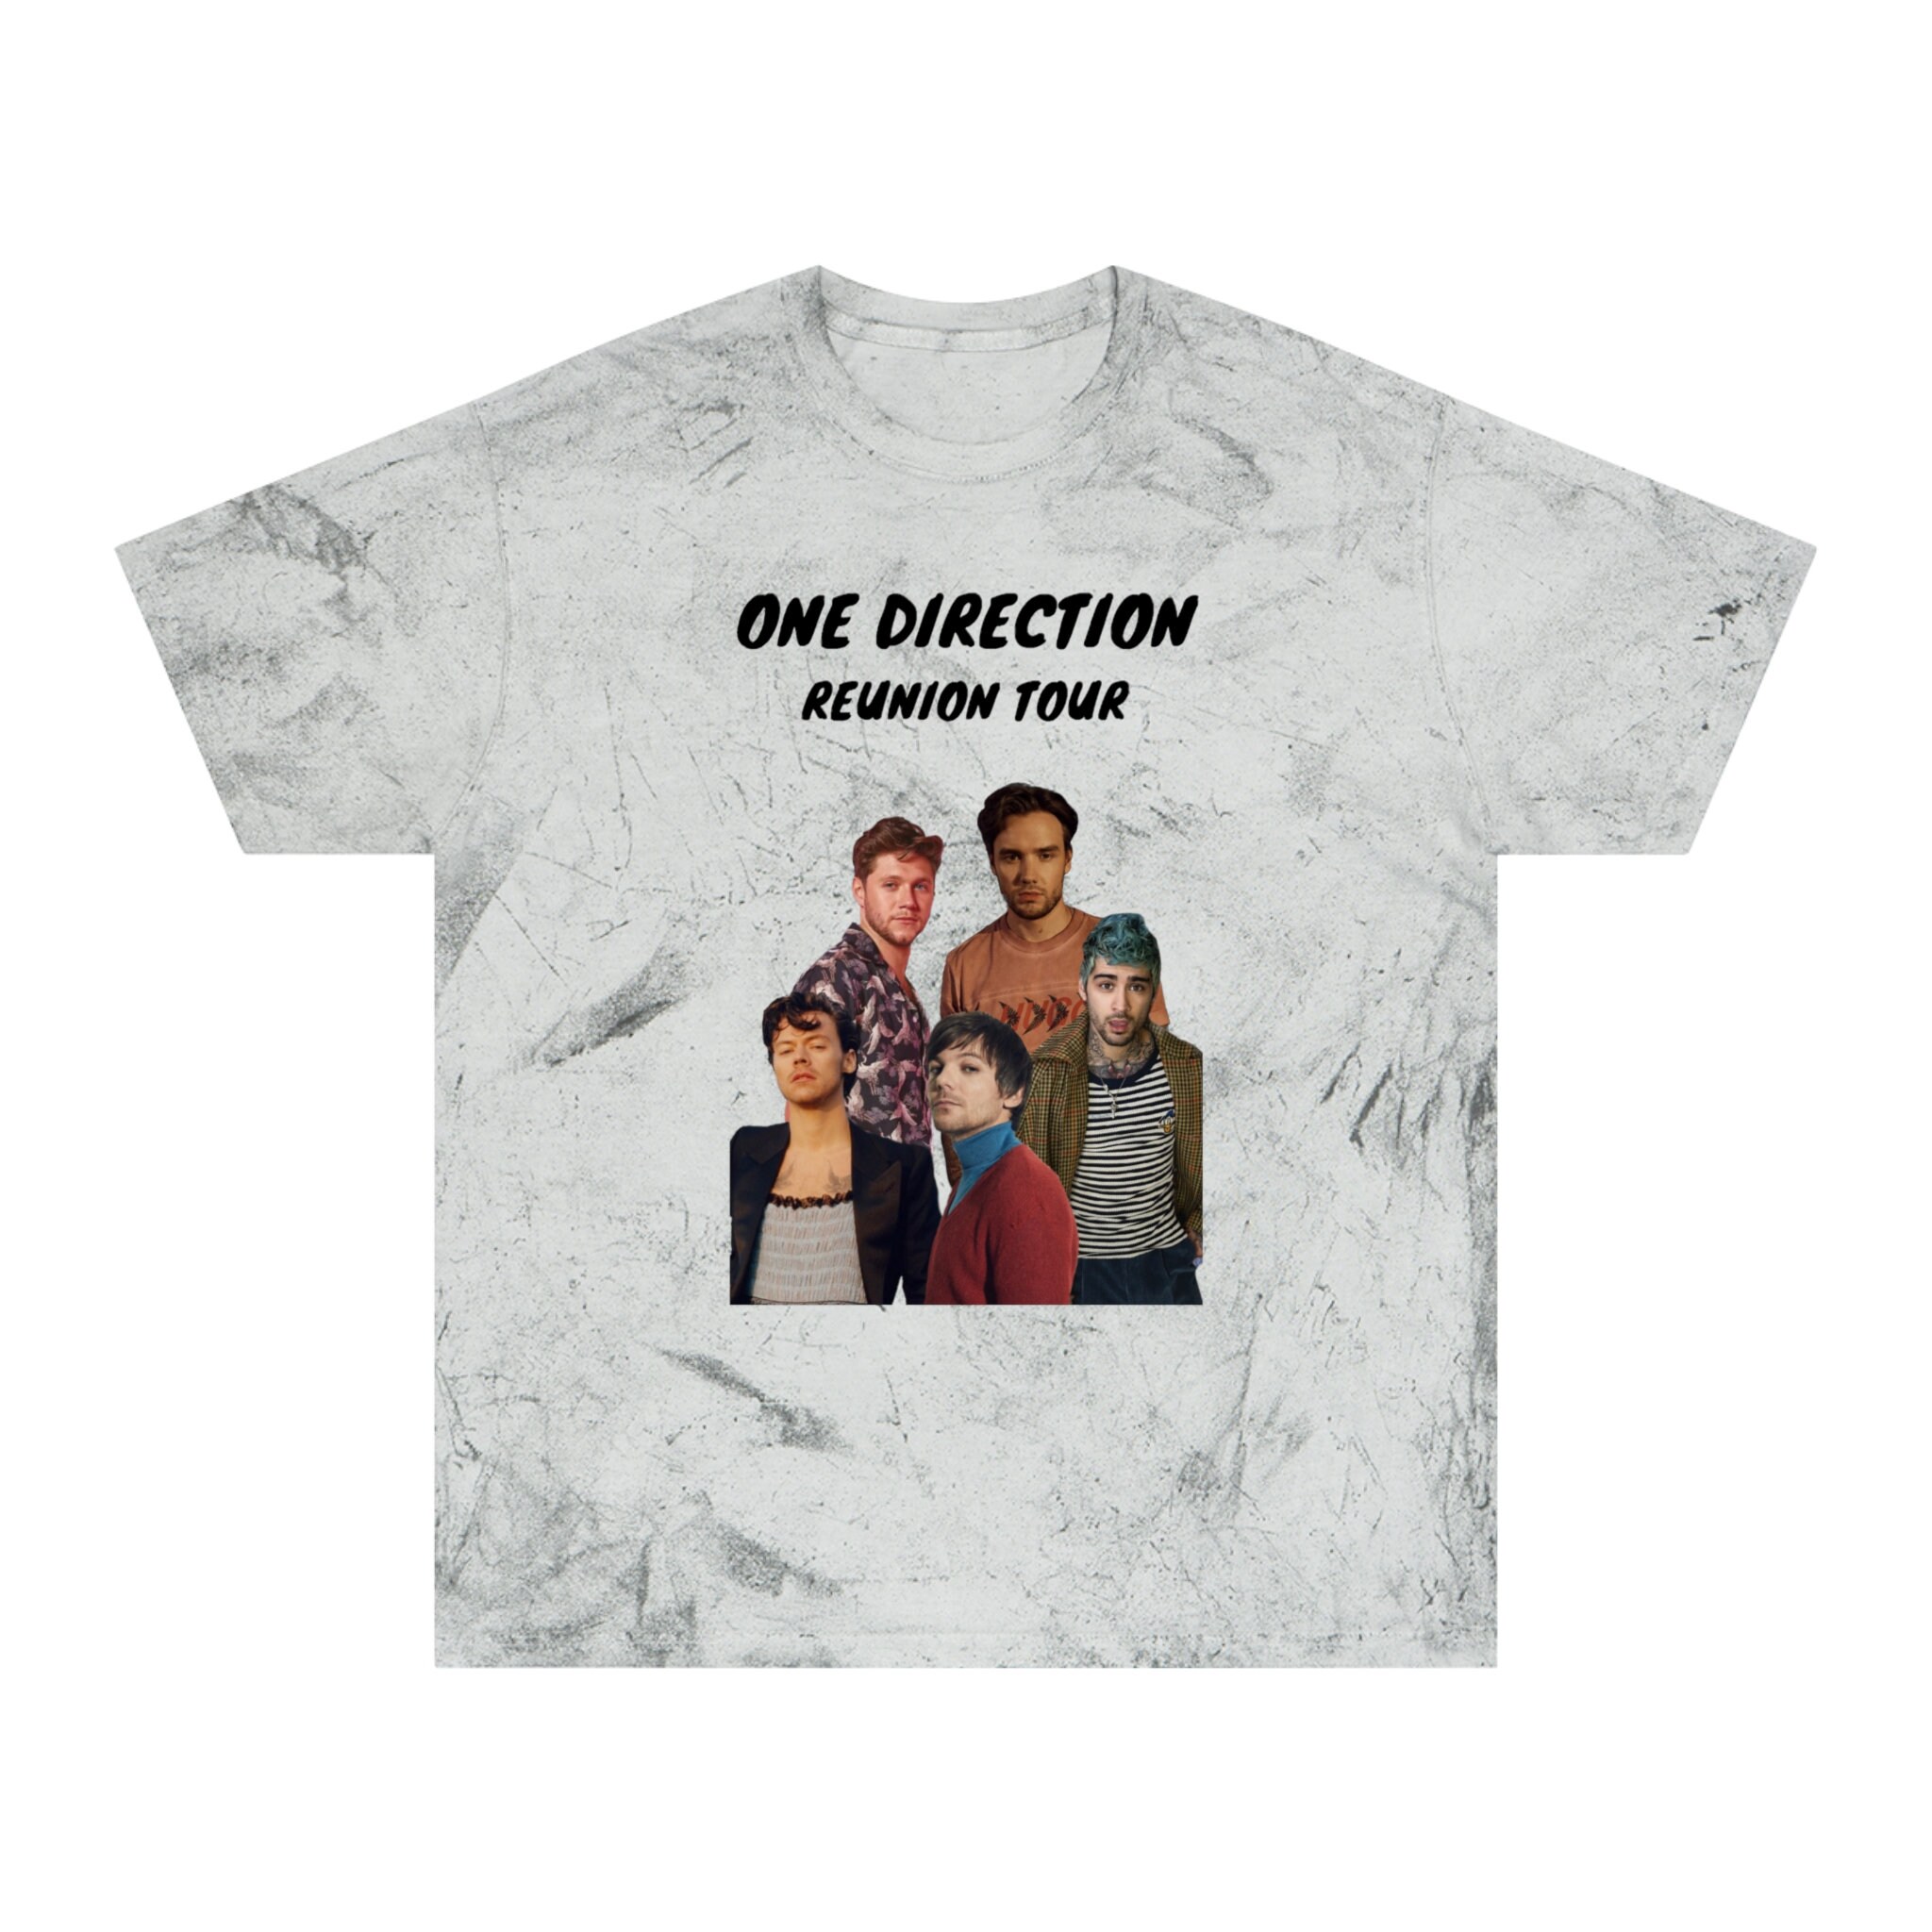 One Direction Up All Night Tour 2012 T-Shirt, One Direction Merch - Unleash  Your Creativity